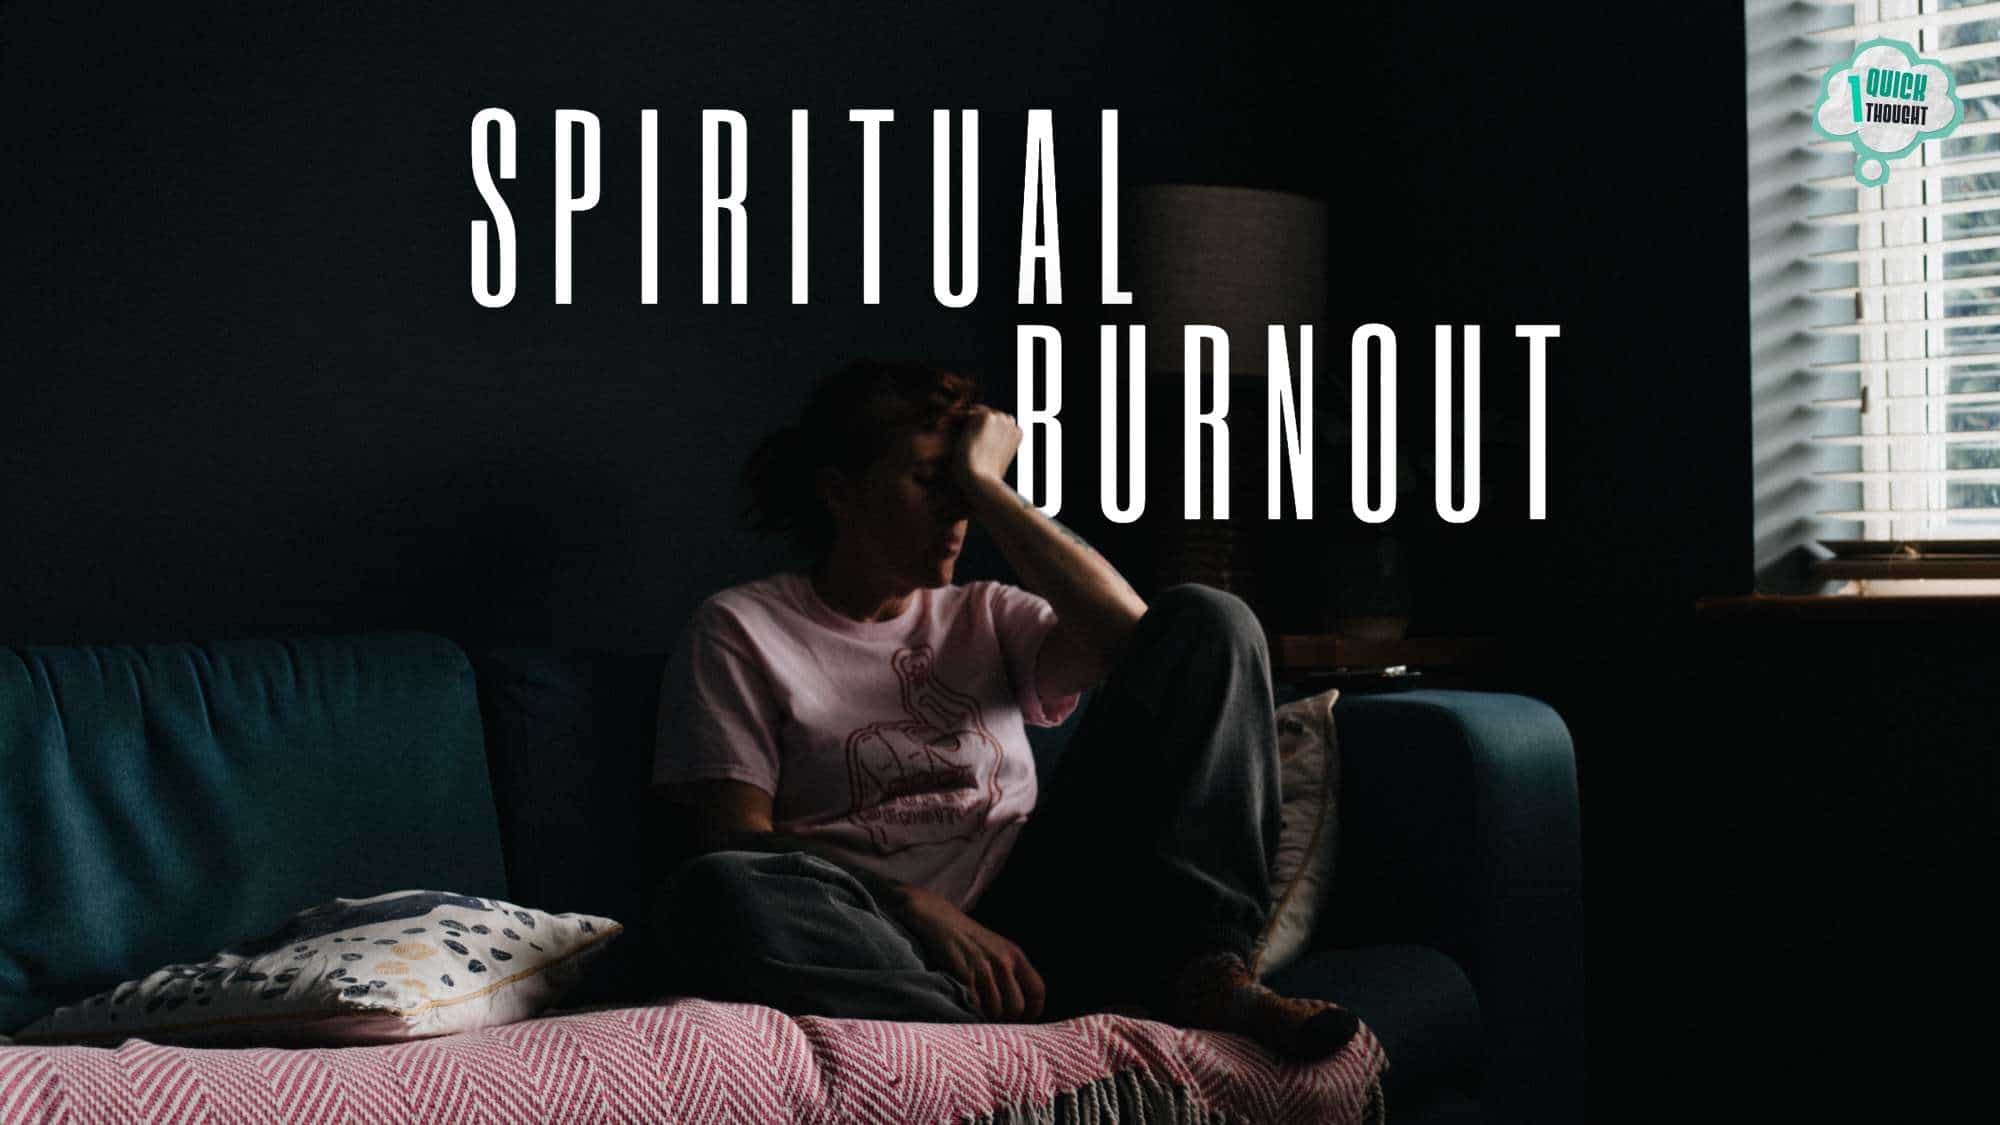 One Quick Thought: How to Get Out of a Spiritual Burnout 7